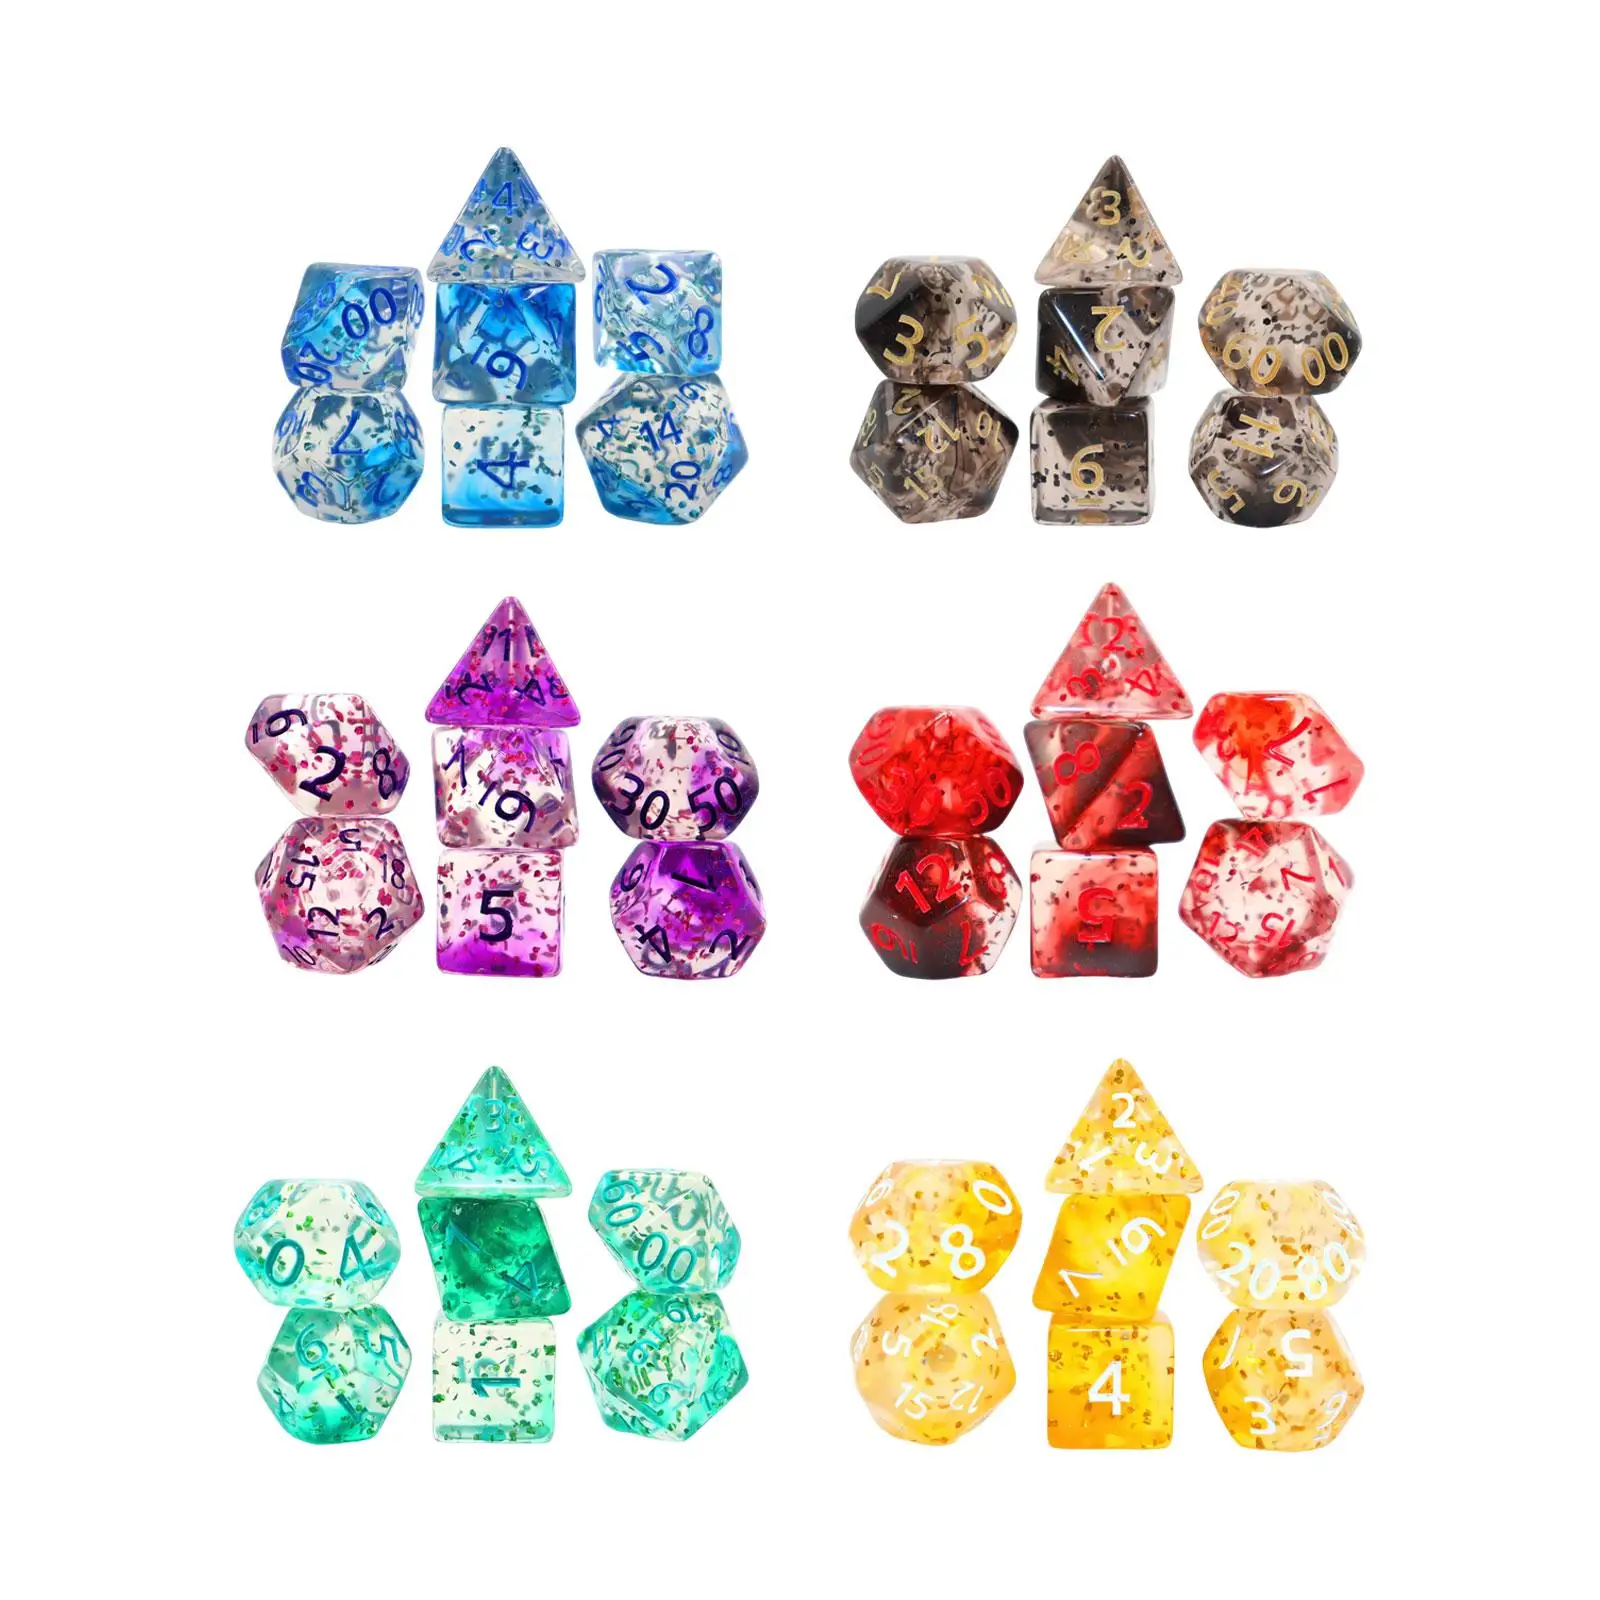 7 Pieces Polyhedral Dices Set D6 D4 D8 D10 D12 D20 Multi Sided Dices for Family Gathering Role Playing Board Game Entertainment